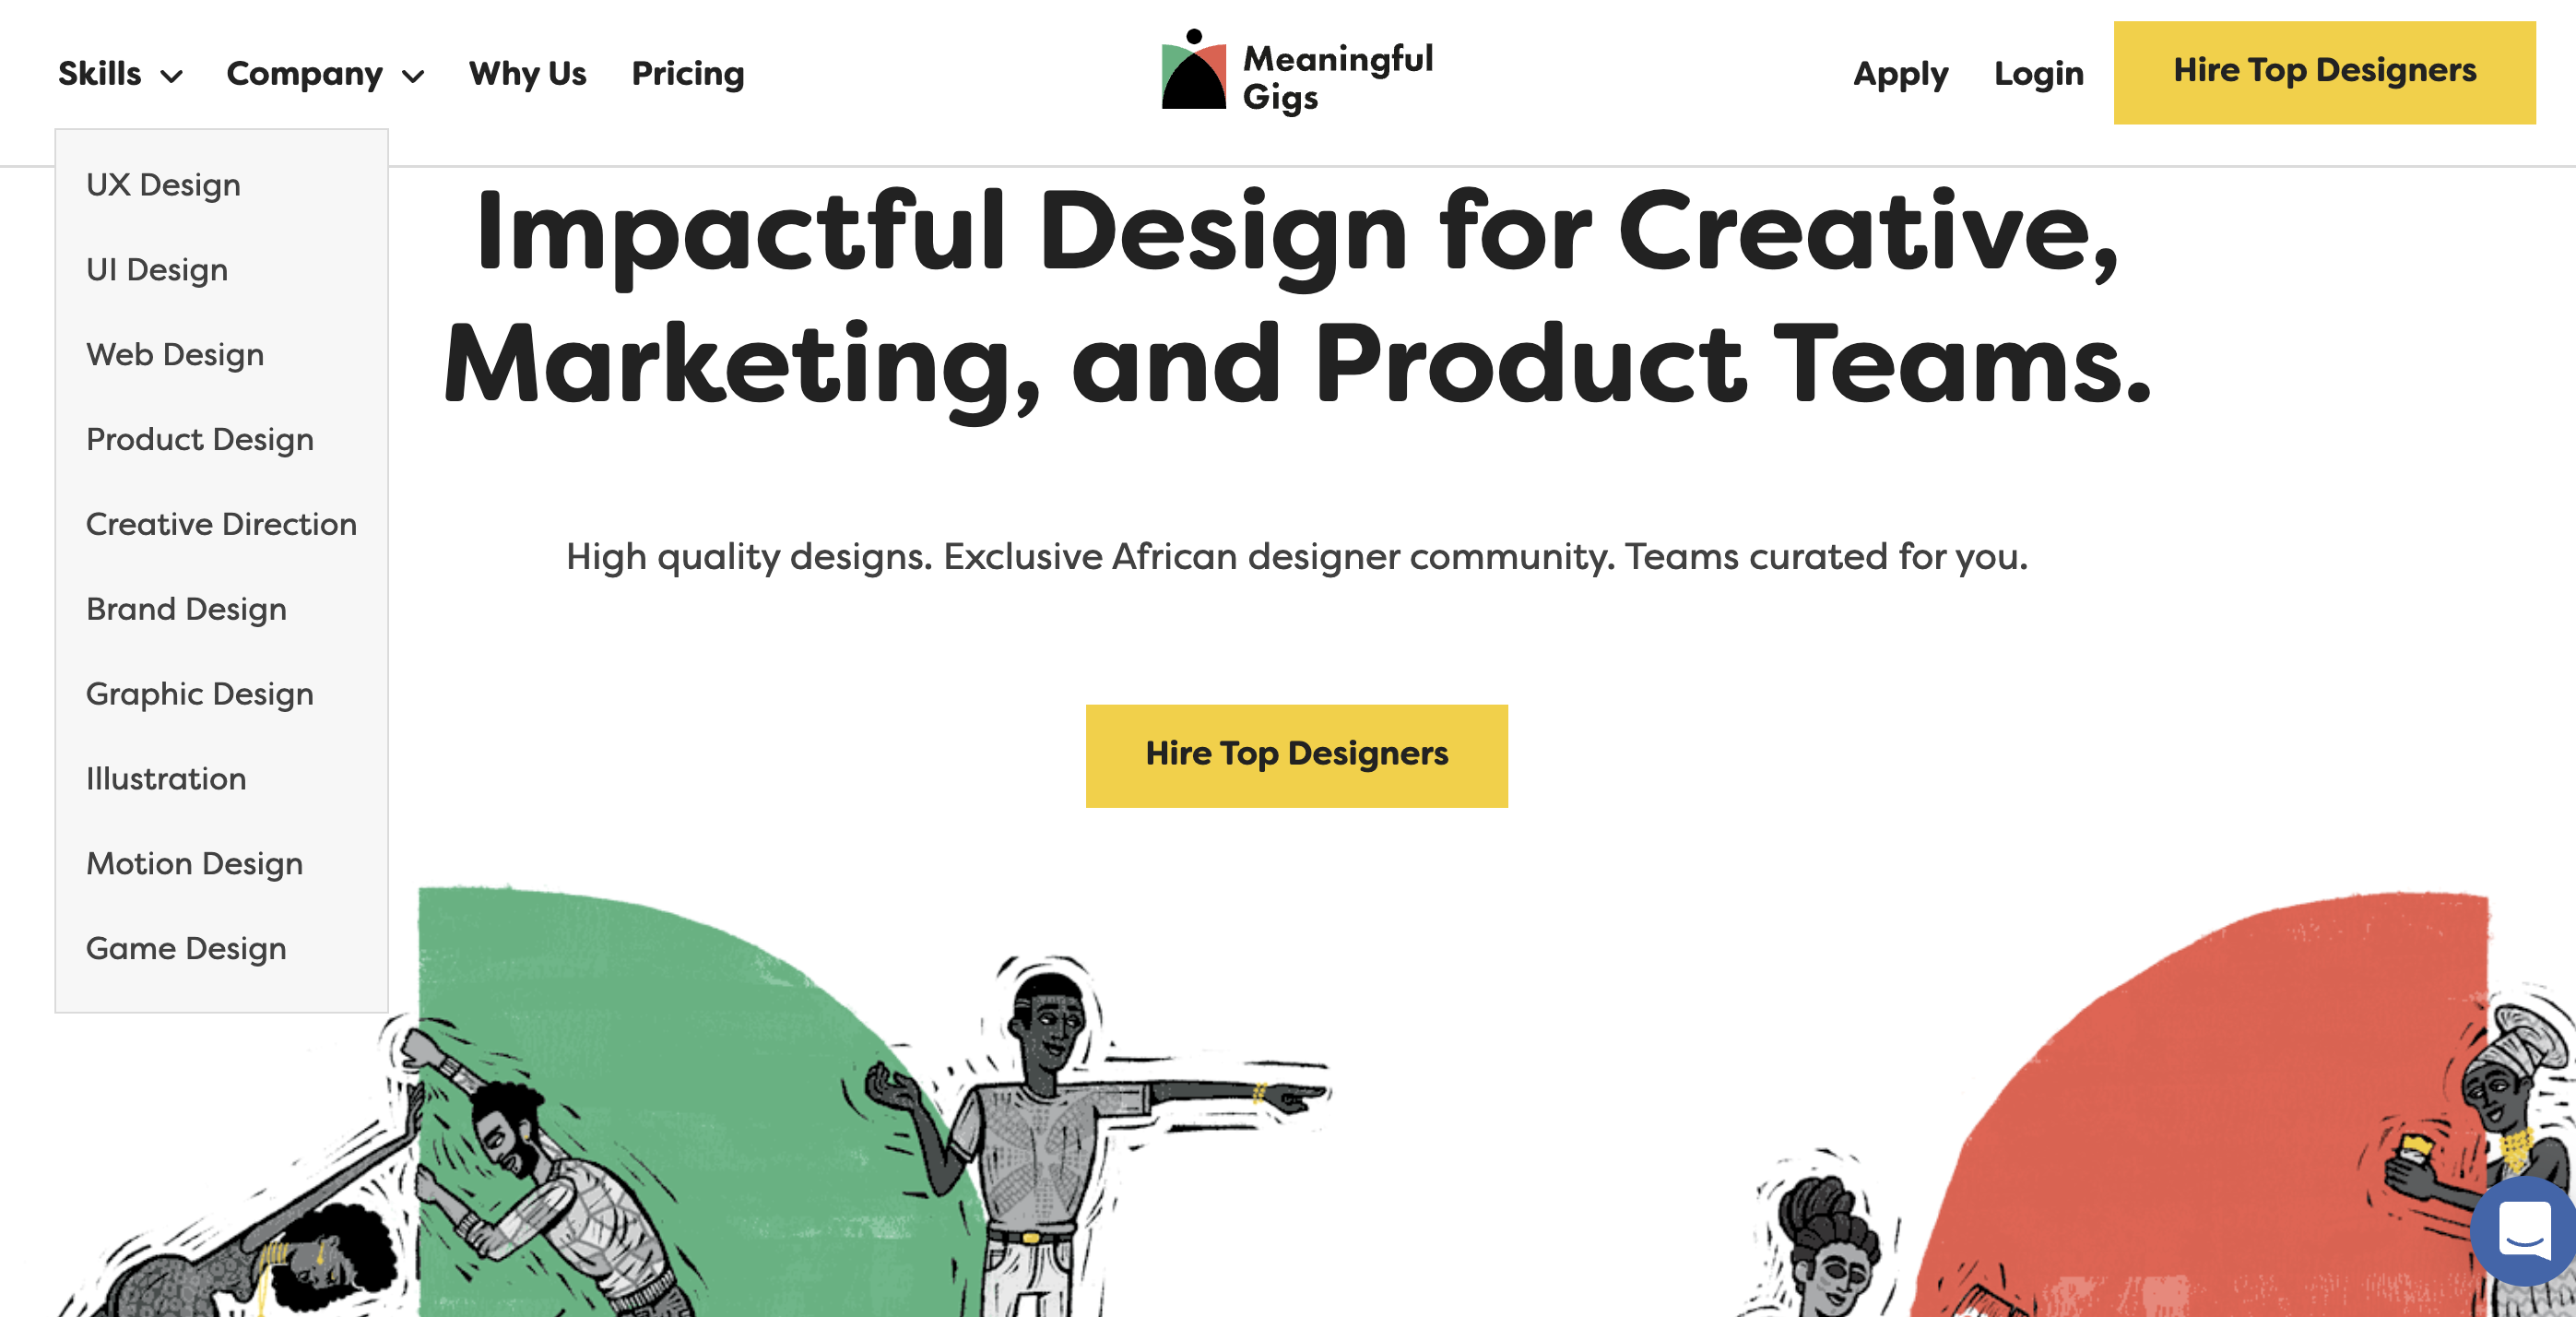 Meaningful Gigs raises M seed to link designers in Africa with remote jobs from US companies